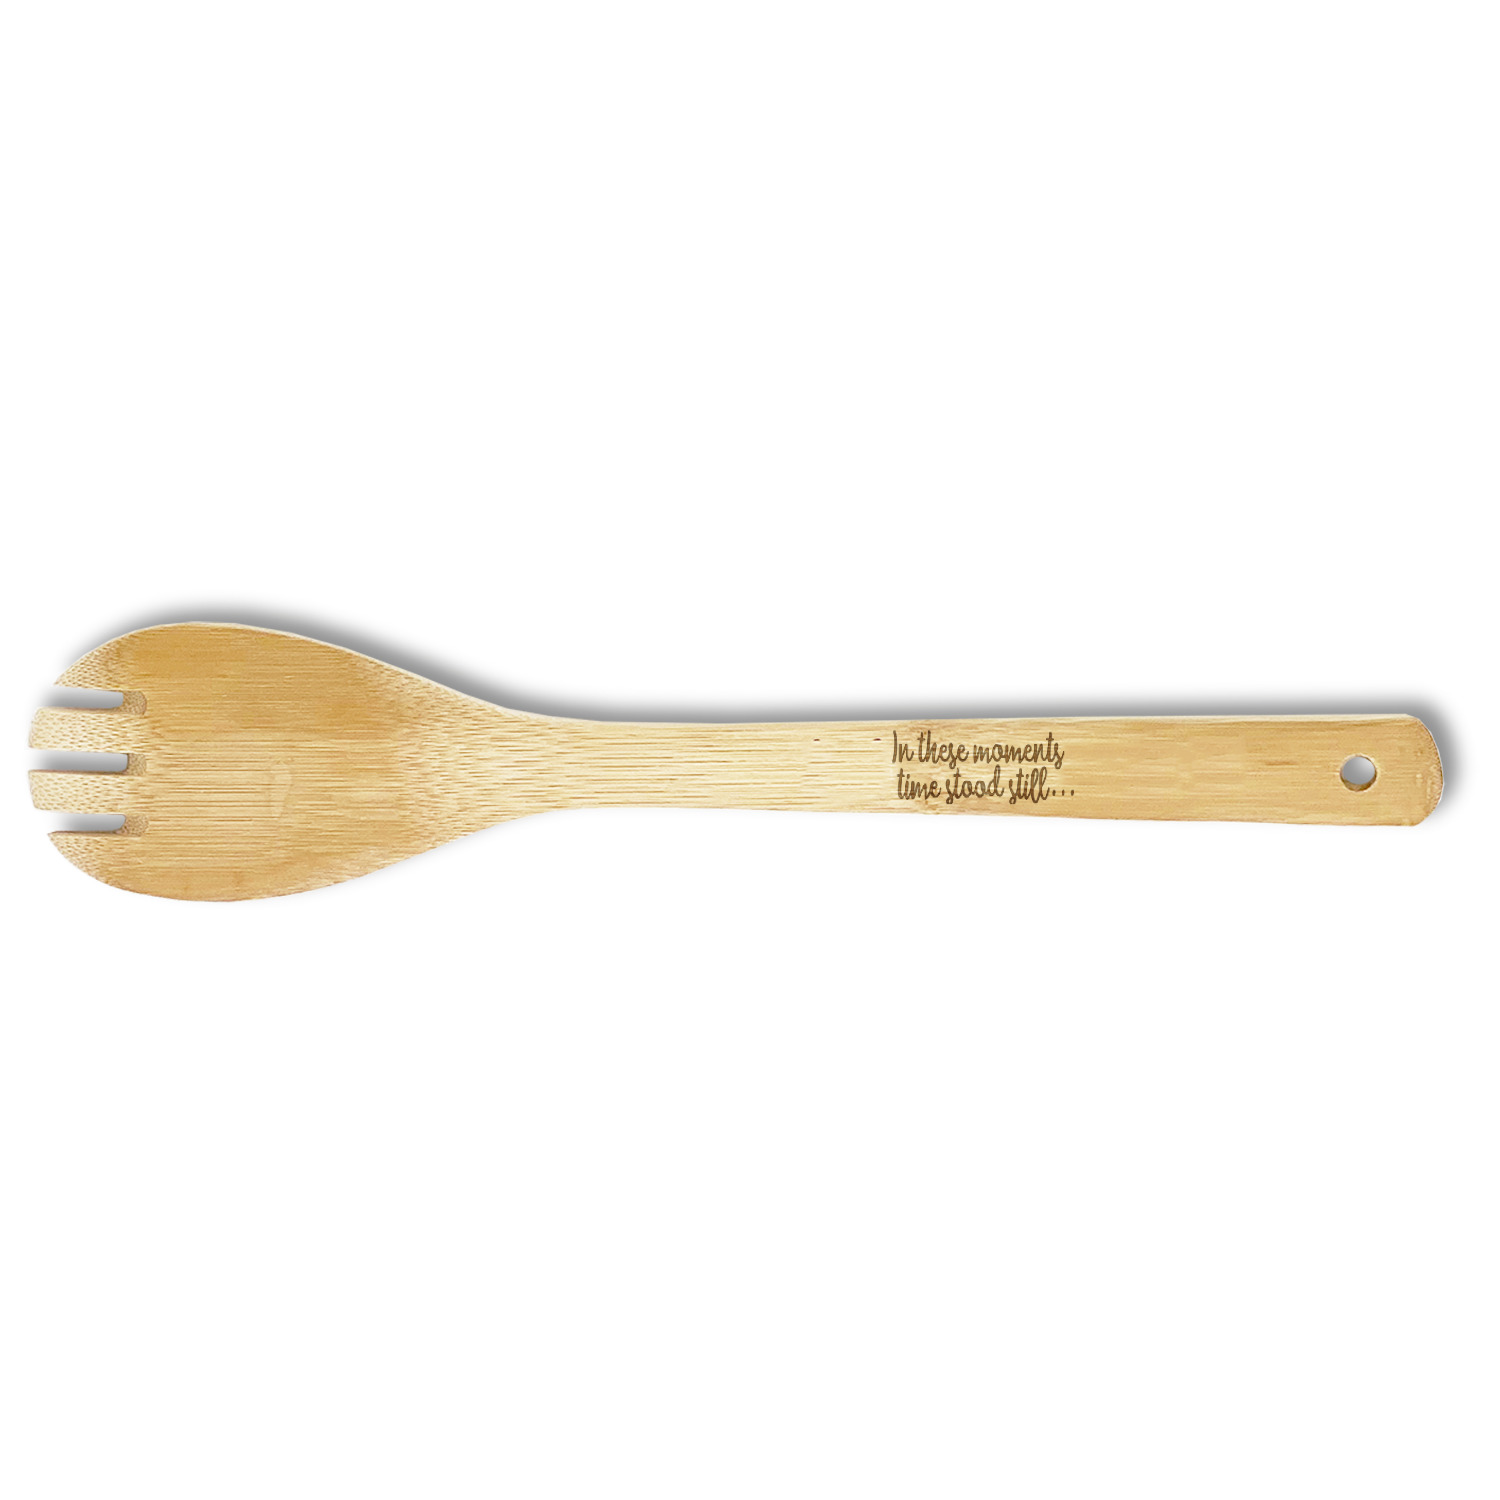 https://www.youcustomizeit.com/common/MAKE/1095102/Inspirational-Quotes-Bamboo-Spork-Single-Sided-FRONT.jpg?lm=1630349122